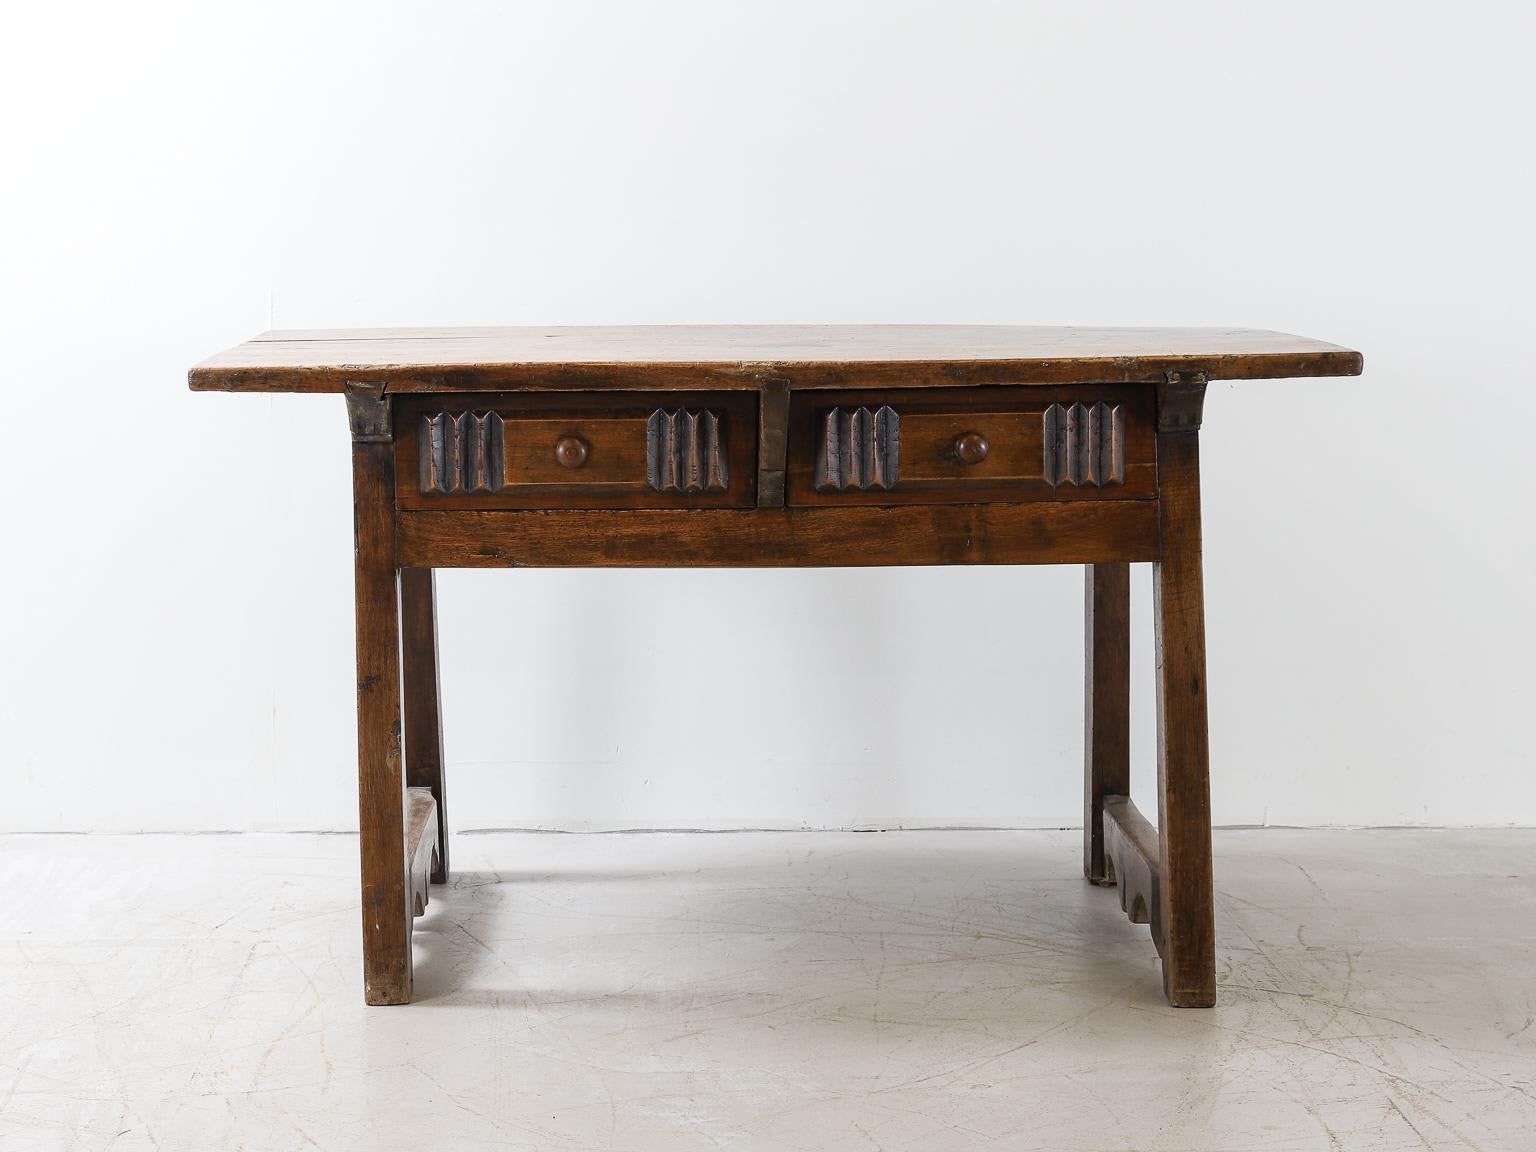 A French carved side table or desk in rich coloured fruitwood; with two drawer frieze, angled legs joined by decorative stretchers, carved wood back panel with decorative patterns etched into the wood, and a wonderfully patinated top.